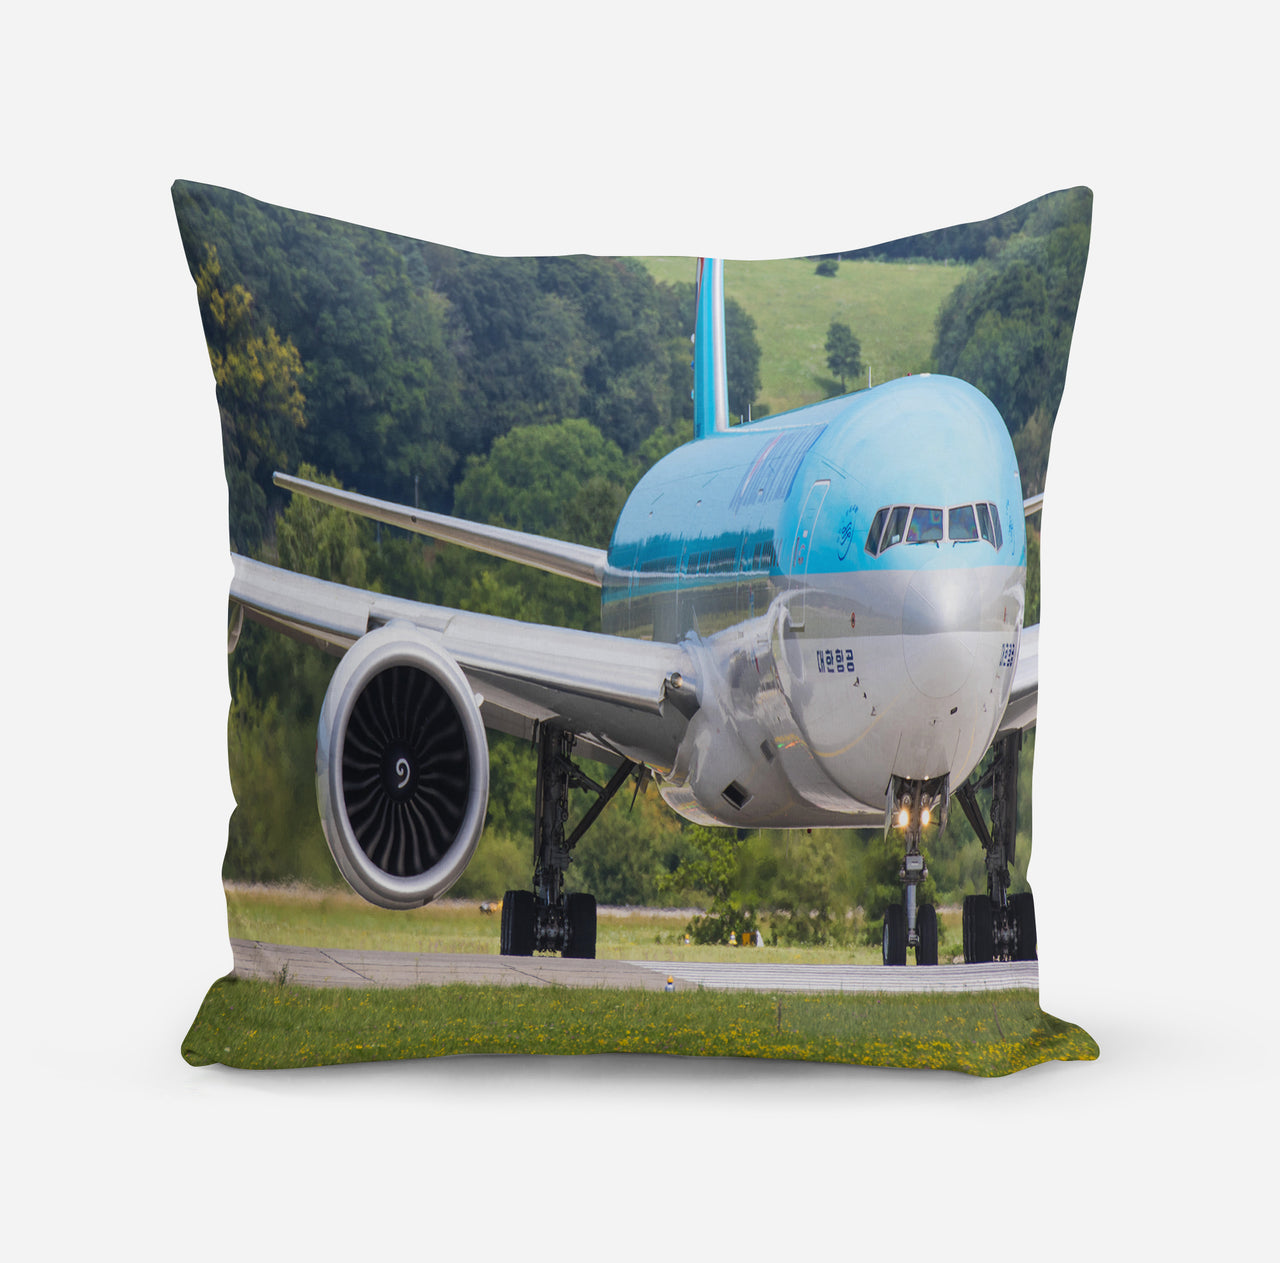 Face to Face with Korean Airlines Boeing 777 Designed Pillows